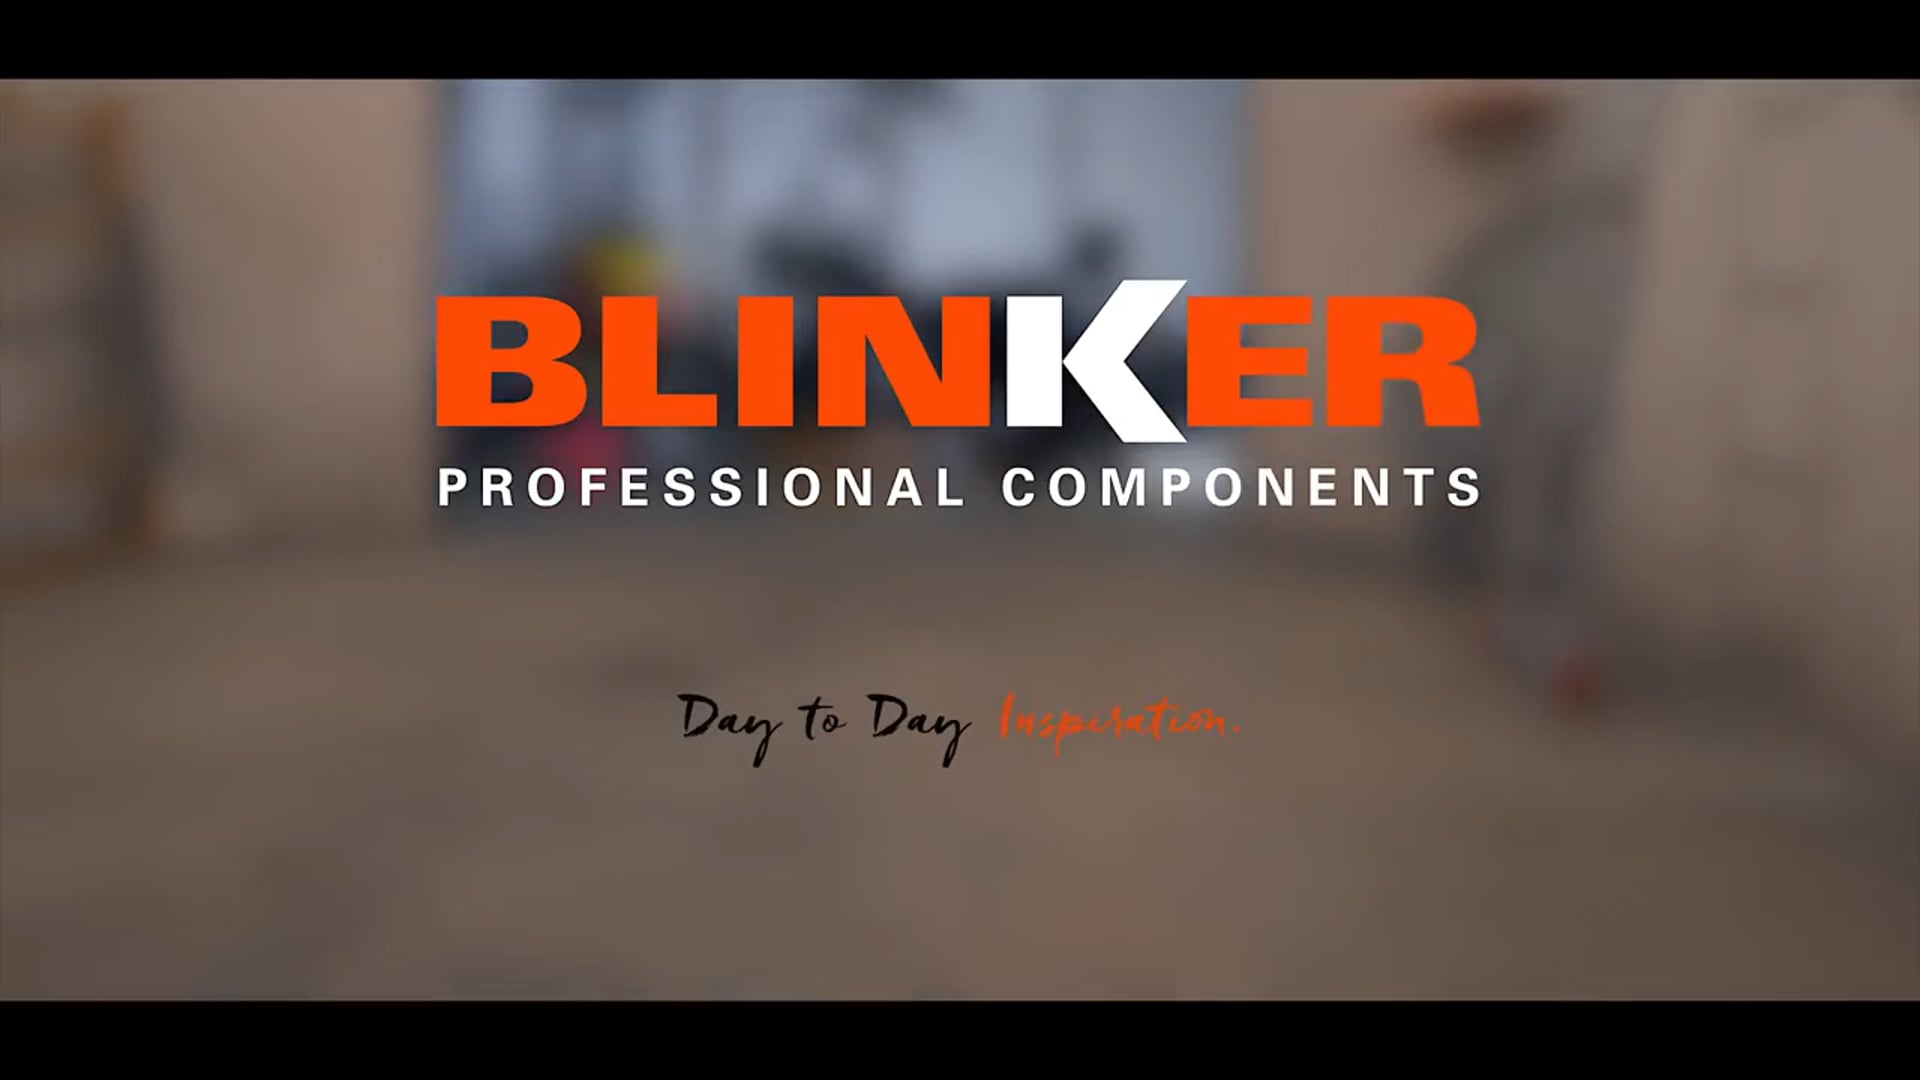 Corporative  BLINKER  "Day to Day Inspiration"